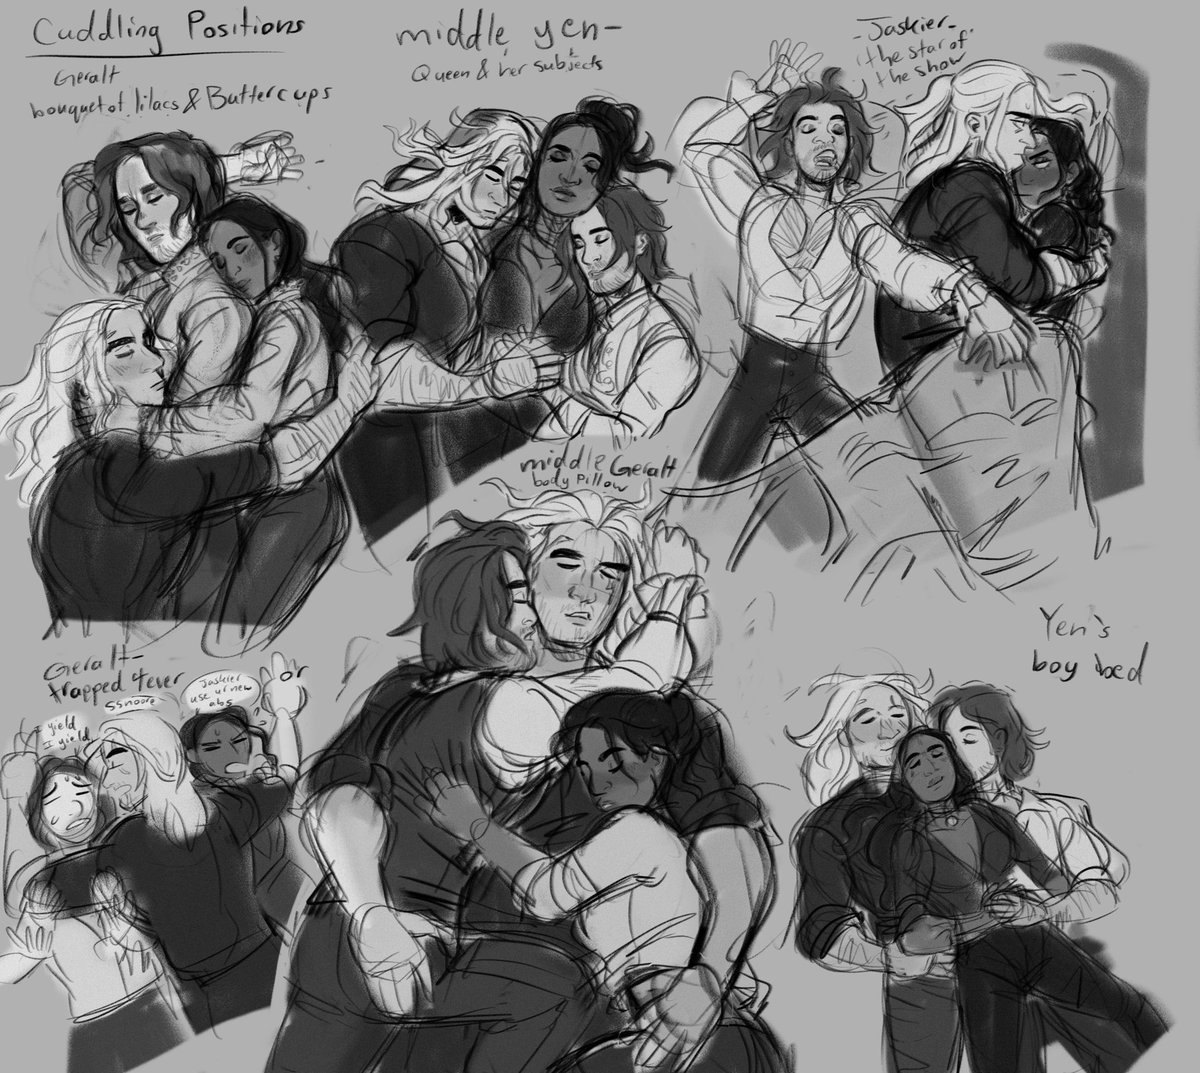 And here is jaskier, geralt and yennefer getting some well deserved rest uwu 